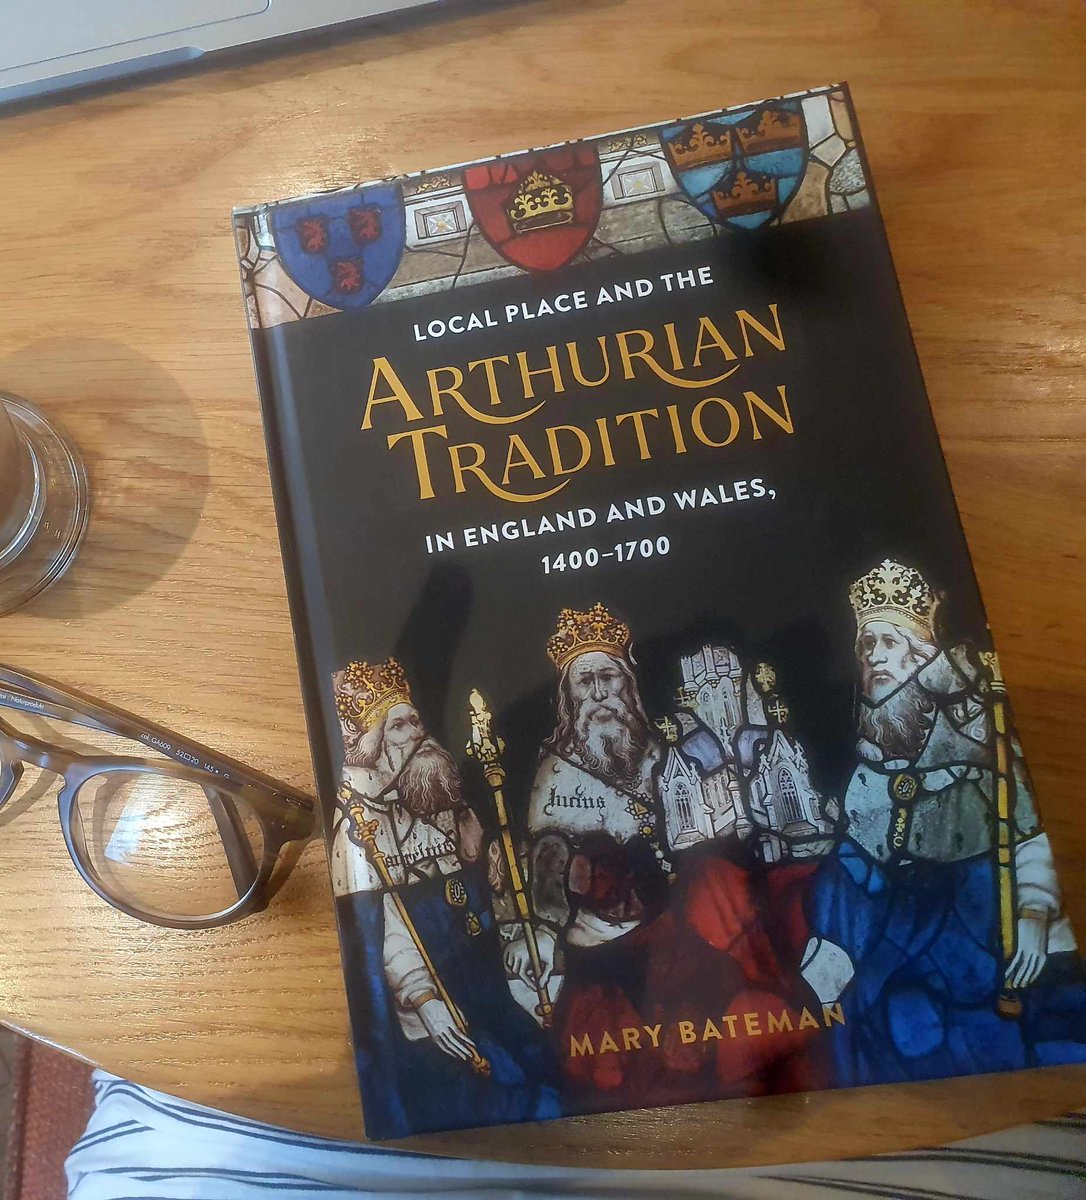 Can't believe it's finally here! After several years of work, my book on local Arthurian places in out in the wild. A huge thank you to @CanaryCaroline for being a wonderful and supportive editor, and understanding when baby arrived and deadlines were pushed.